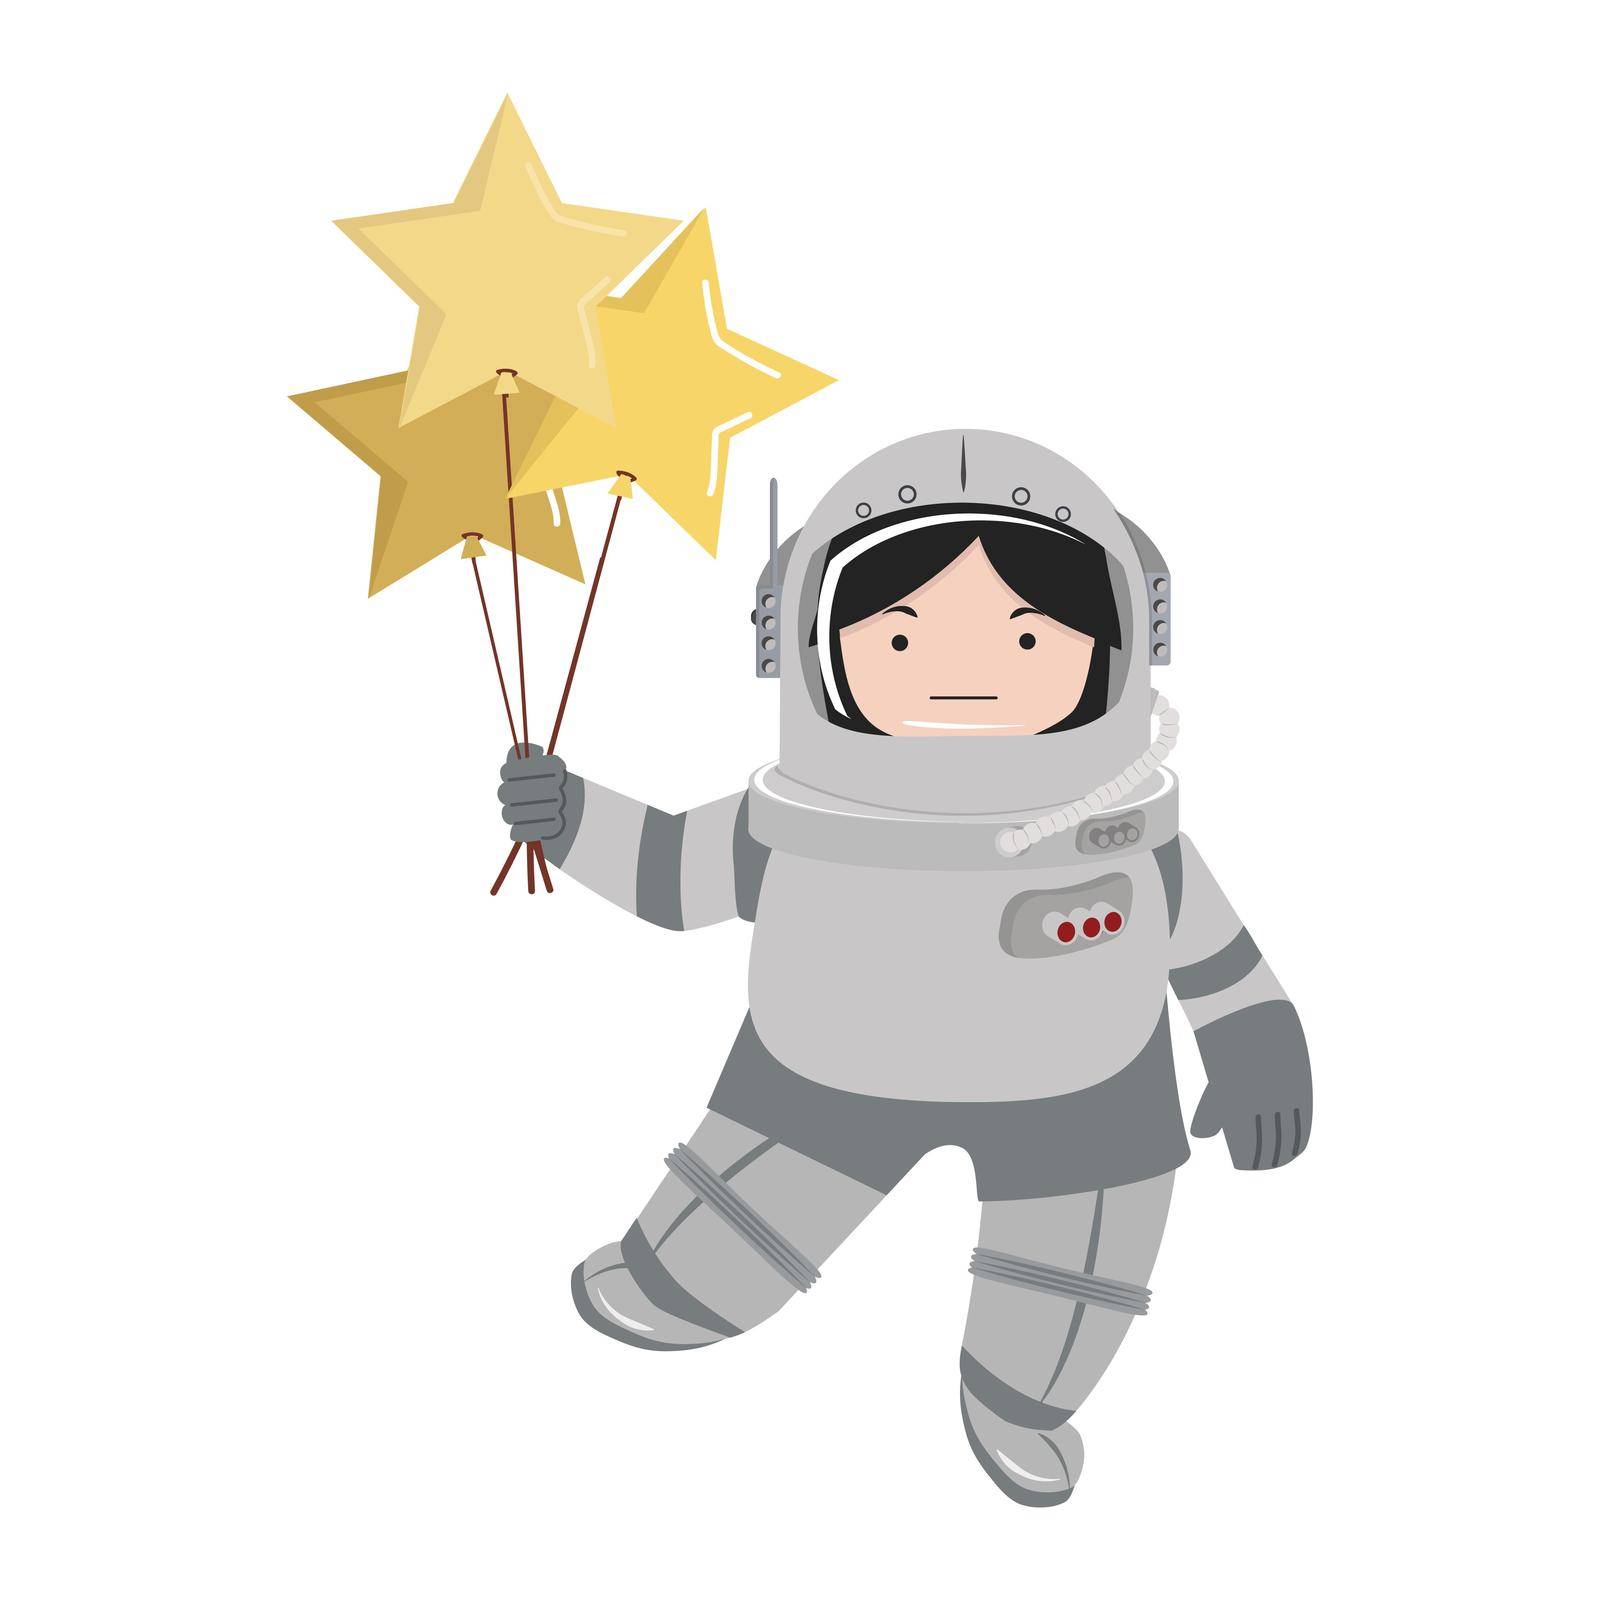 Small girl Astronaut holds a balloon by focus_bell